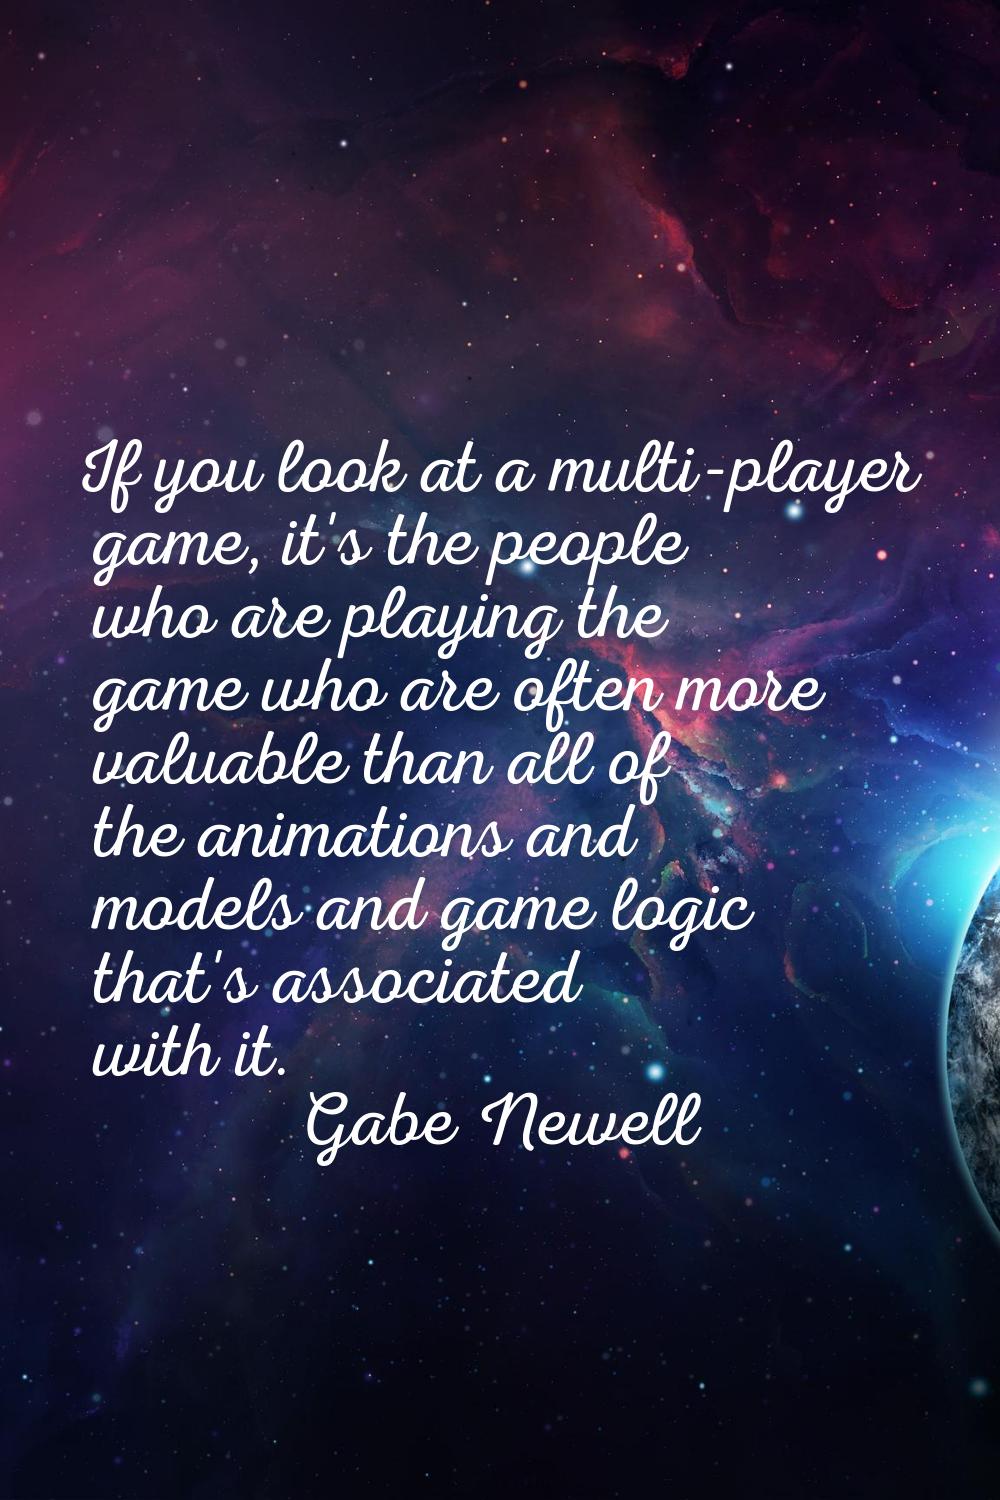 If you look at a multi-player game, it's the people who are playing the game who are often more val